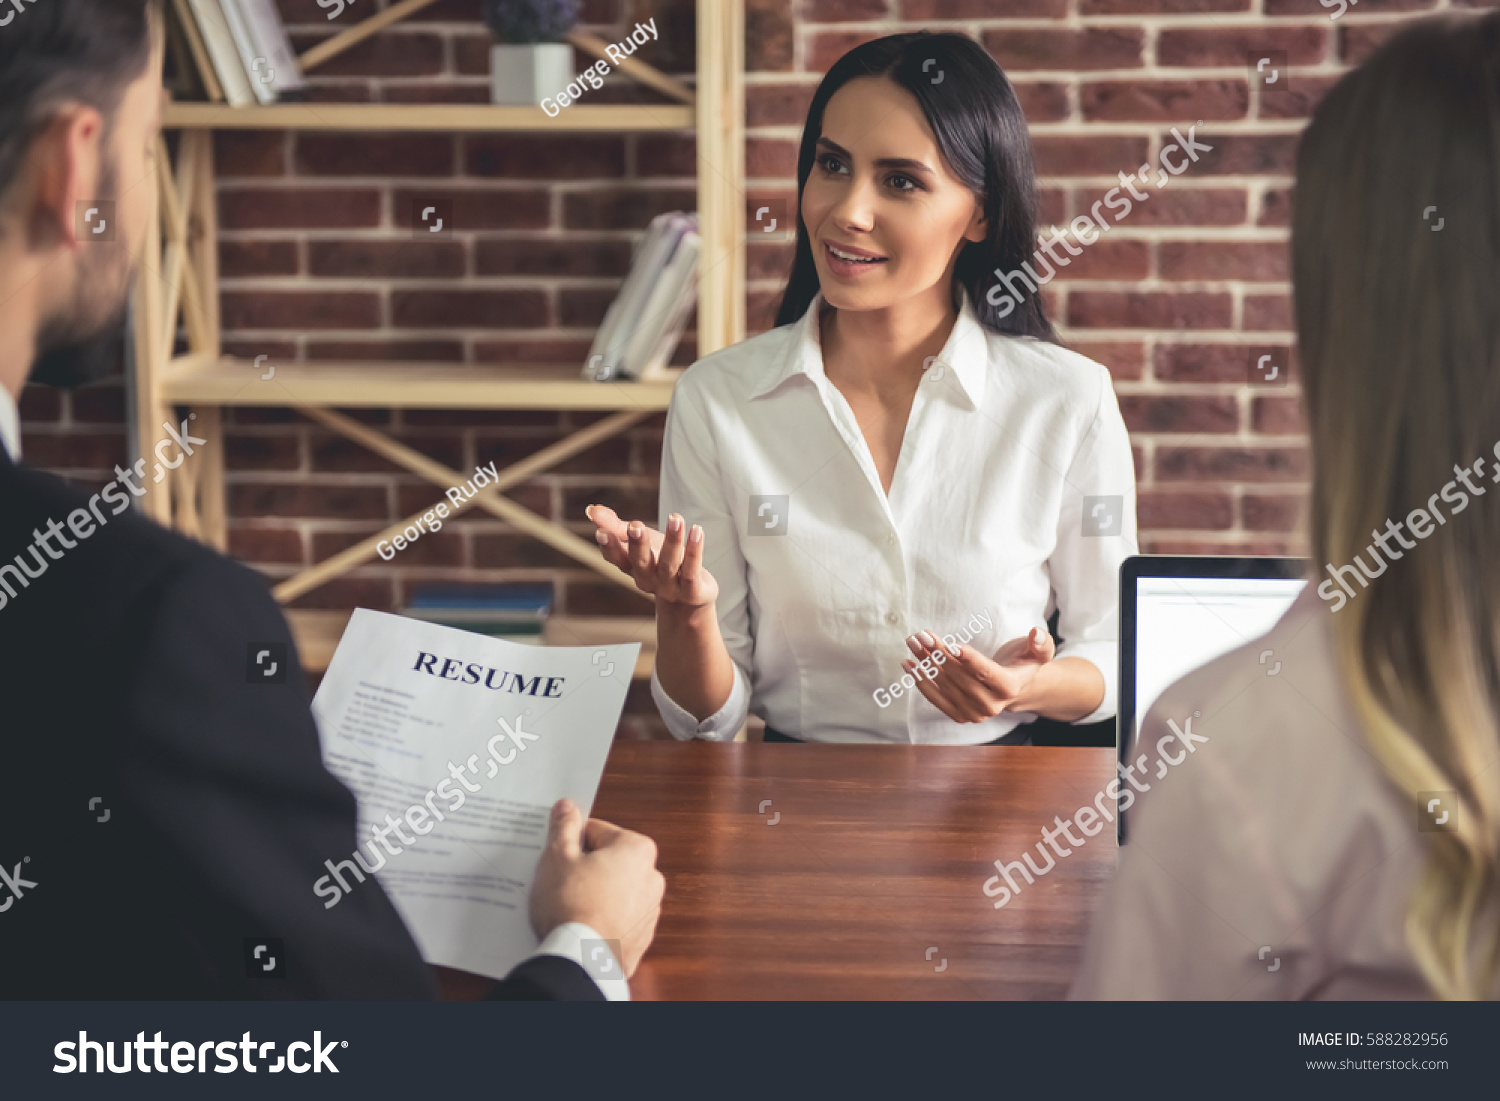 Beautiful female employee in suit is smiling during the job interview #588282956